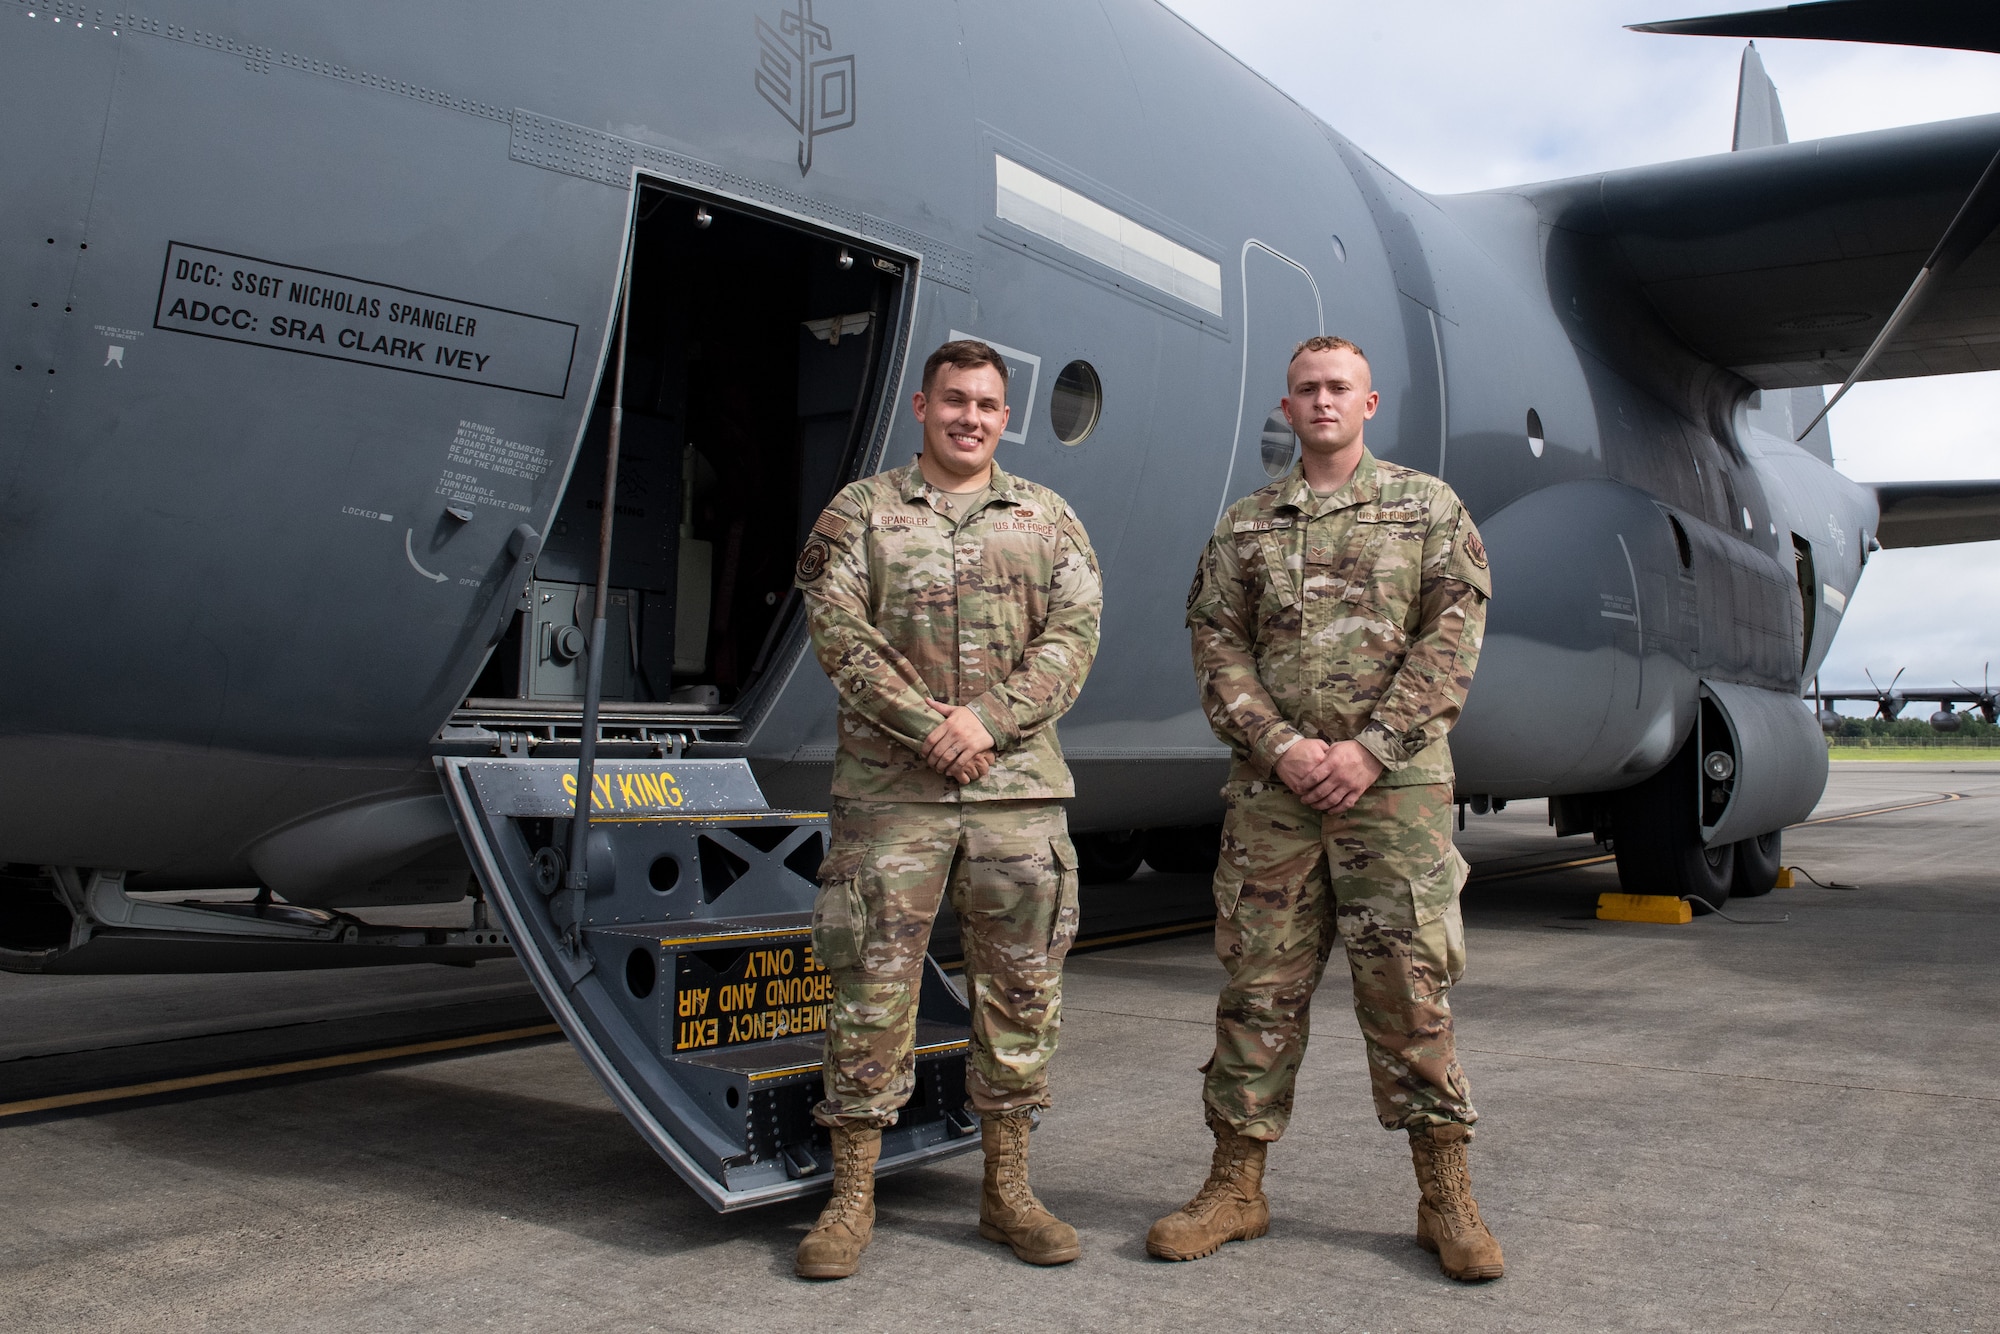 U.S. Air Force Staff Sgt. Nicholas Spangler, 71st Rescue Generation Squadron dedicated crew chief, and Senior Airman Clark Ivey, 71st RGS assistant dedicated crew chief, stand by an HC-130J Combat King II on July 12, 2022, at Moody Air Force Base, Georgia. Spangler and Ivey achieved a defect-free Black Letter flight, a rare occurrence in a maintainer's career. (U.S. Air Force photo by Staff Sgt. John Crampton)